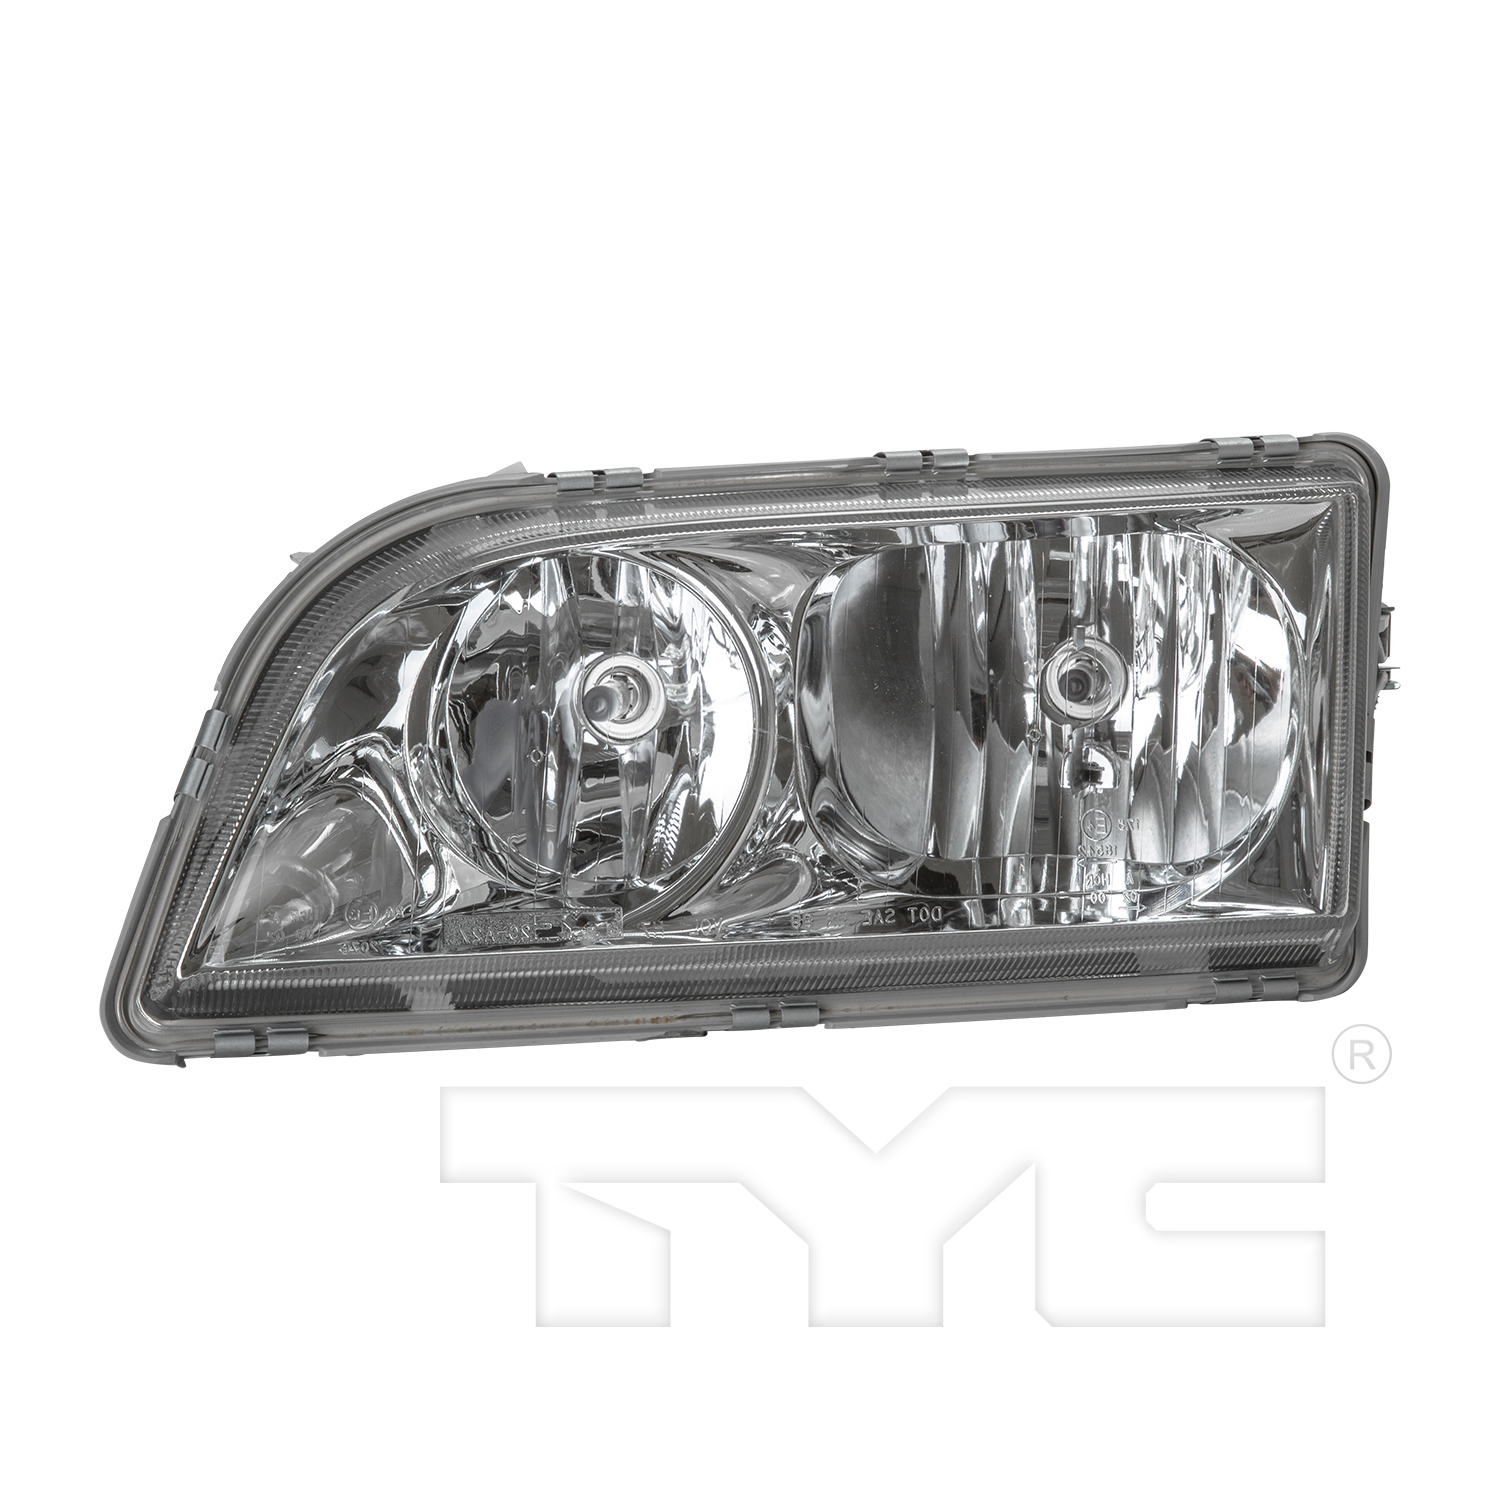 Aftermarket HEADLIGHTS for VOLVO - S40, S40,00-04,LT Headlamp assy composite